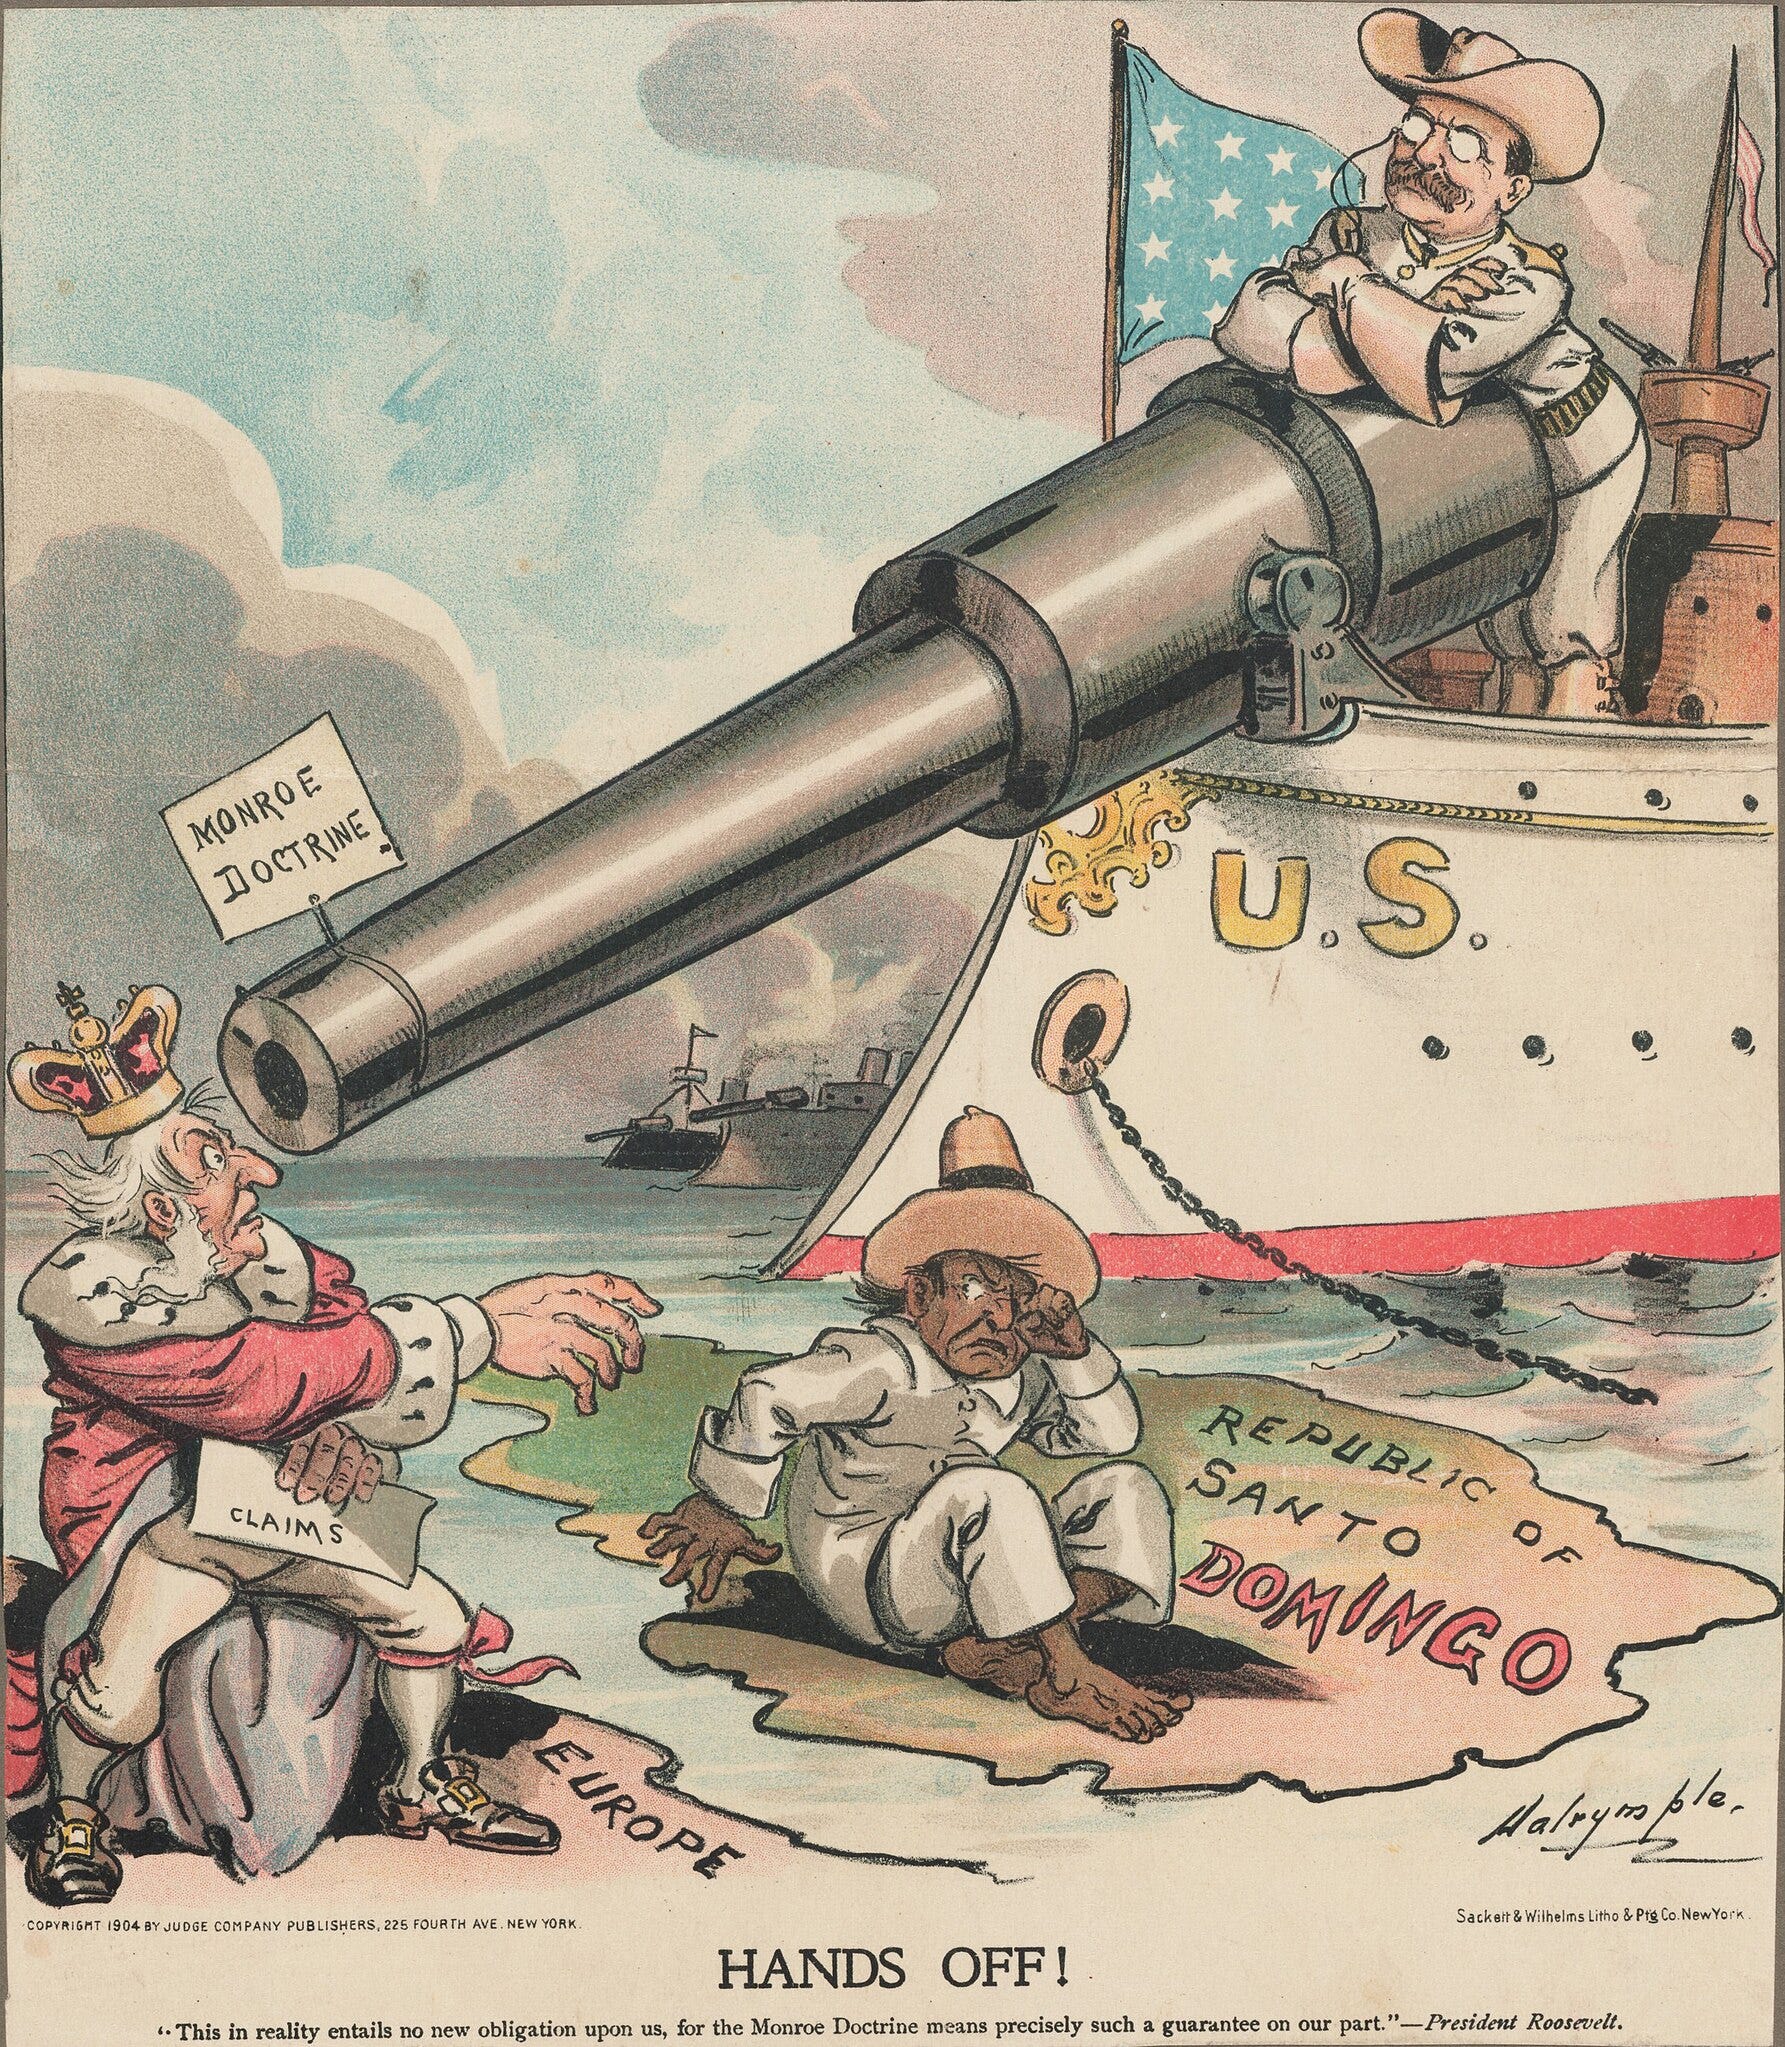 Political cartoon depicting Theodore Roosevelt using the Monroe Doctrine to keep European powers out of the Dominican Republic.